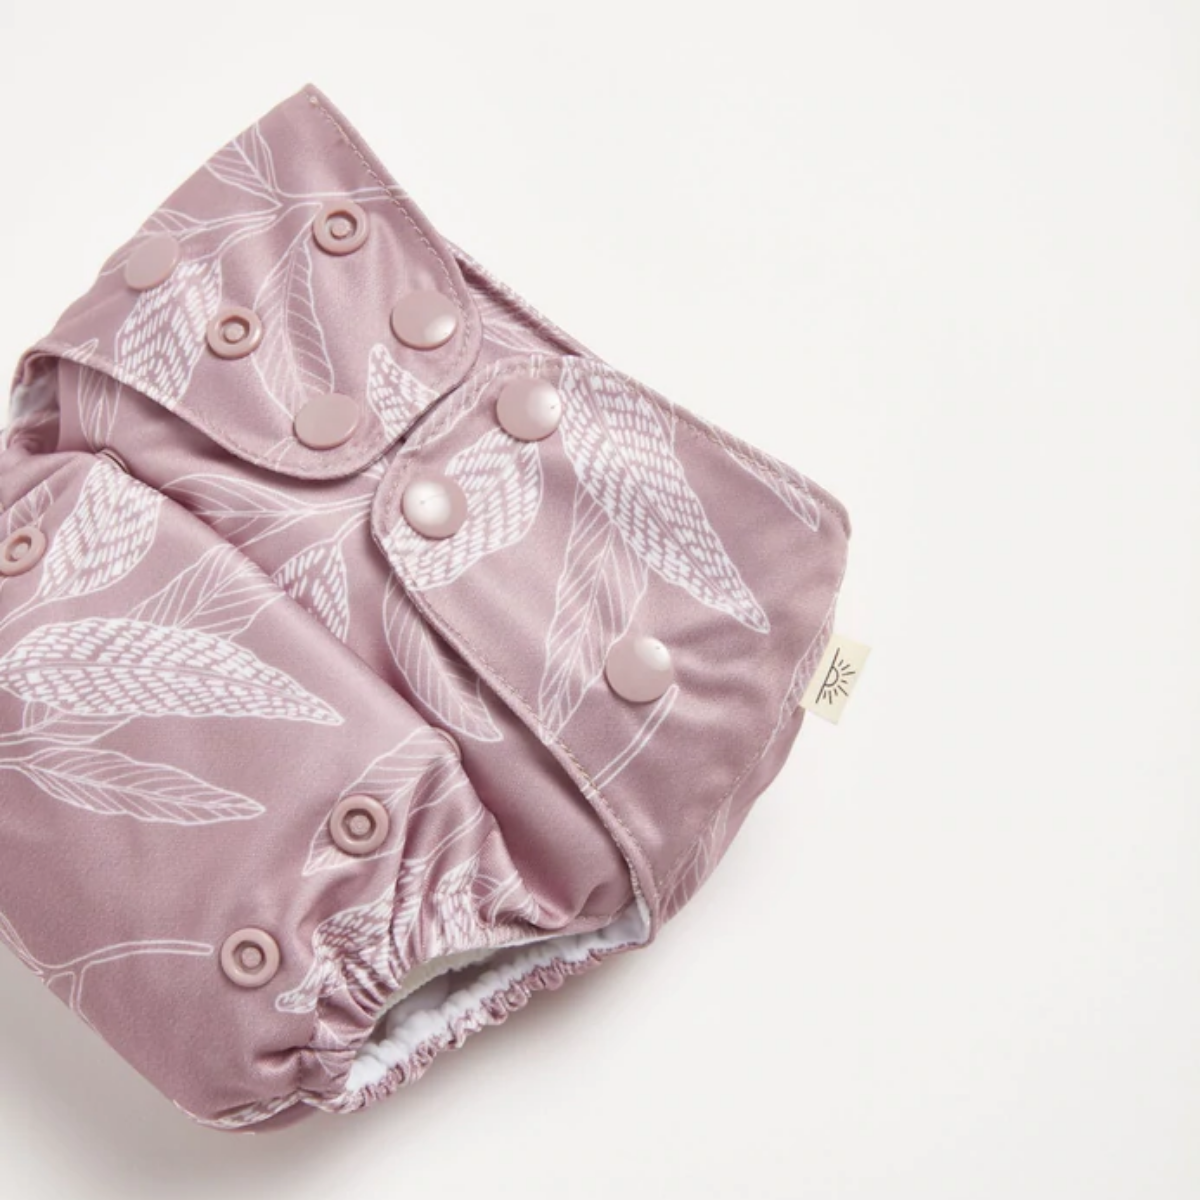 A modern cloth nappy with a native print from EcoNaps in the shade Mauve Native 2.0 on a white background.